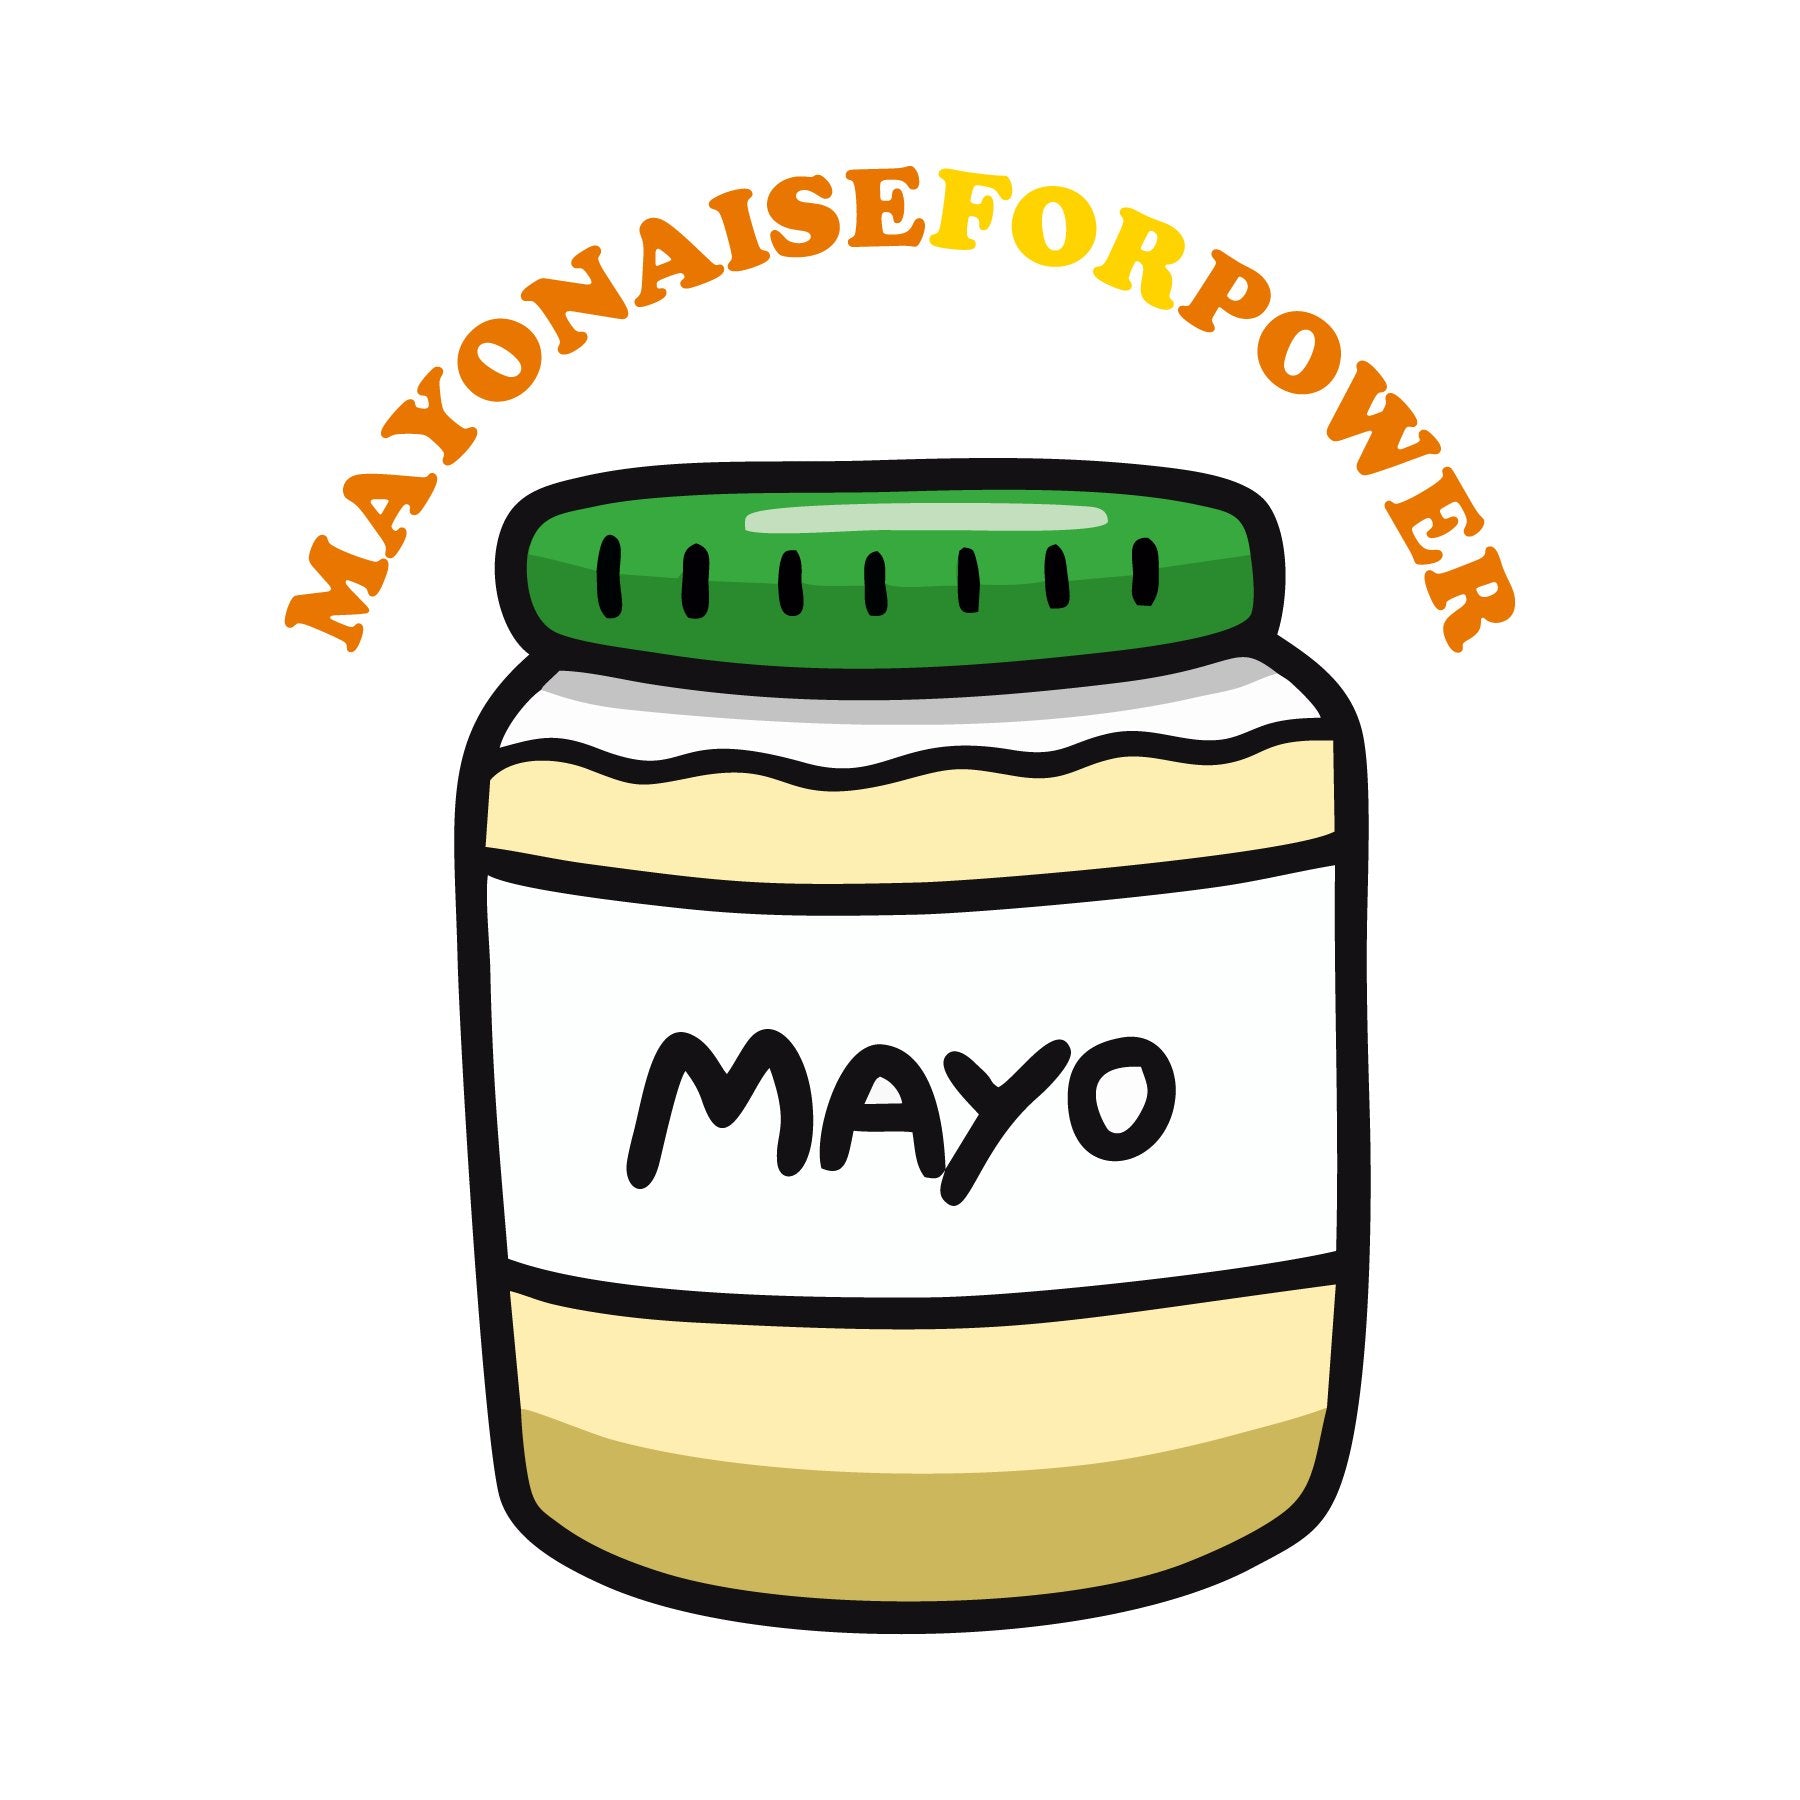 Mayonaise for Power, t-shirt pour hommes